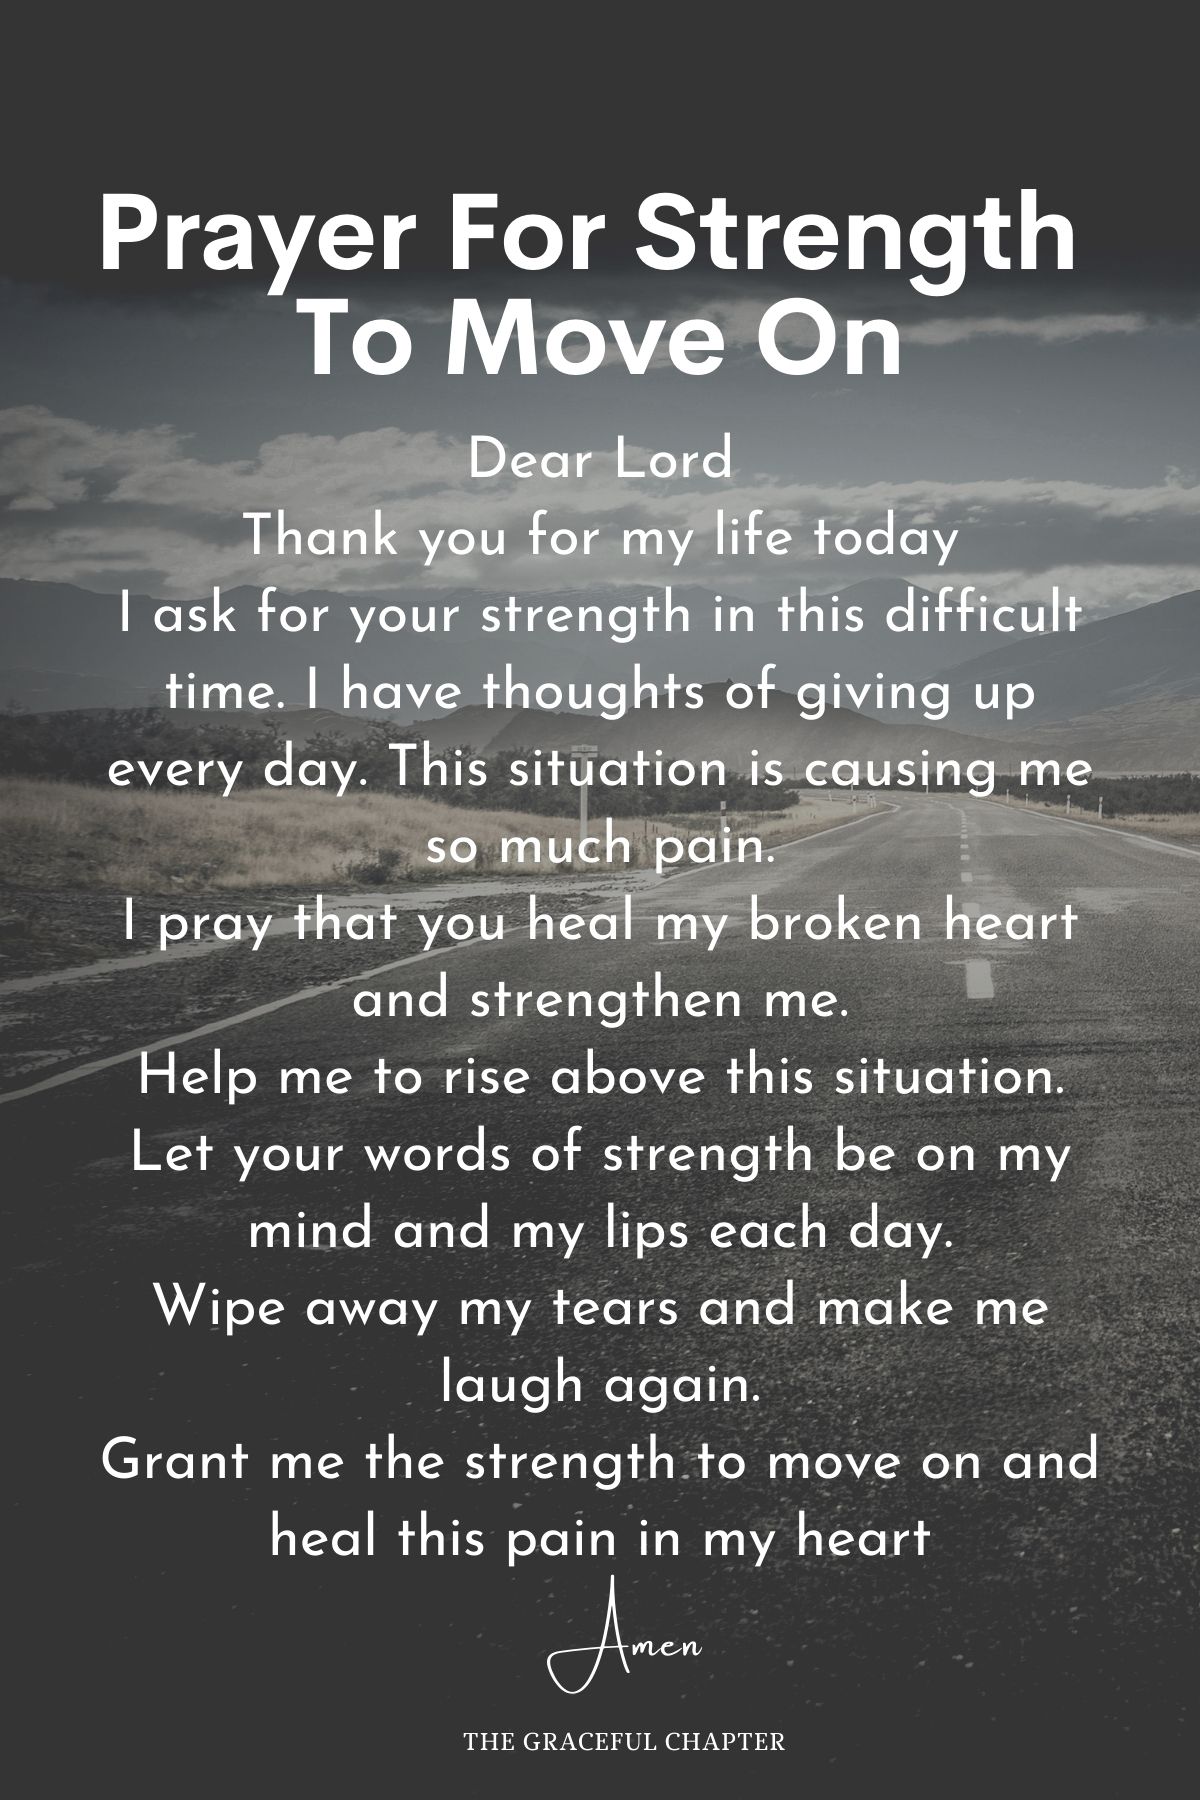 Prayer for strength to move on